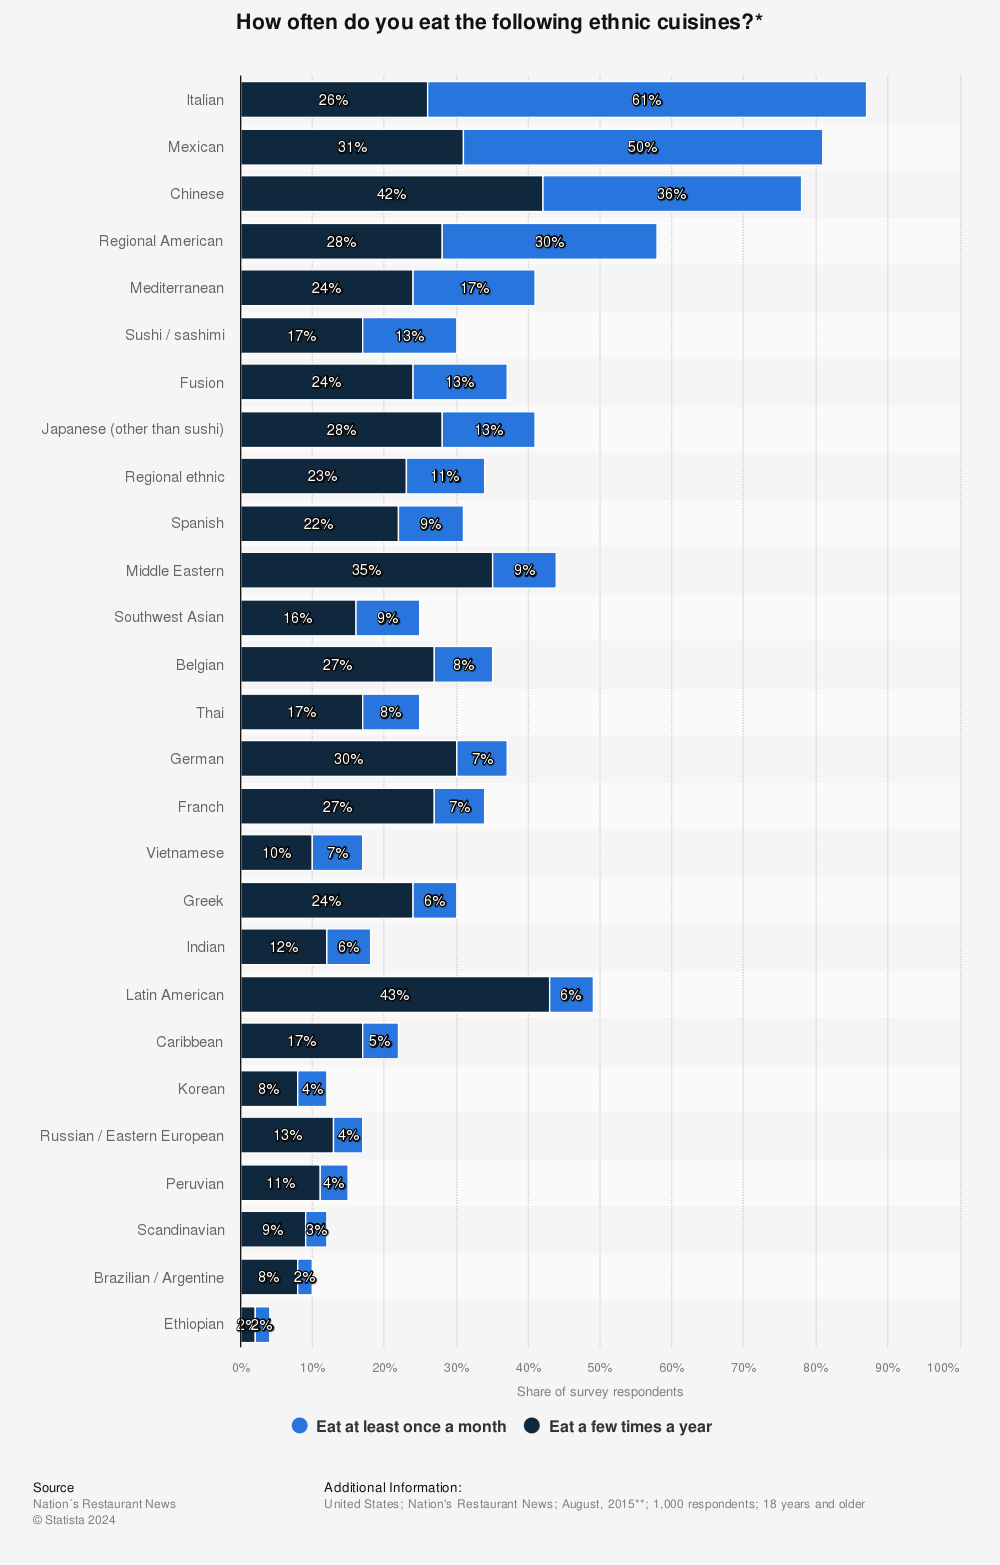 Statistic: How often do you eat the following ethnic cuisines?*  | Statista